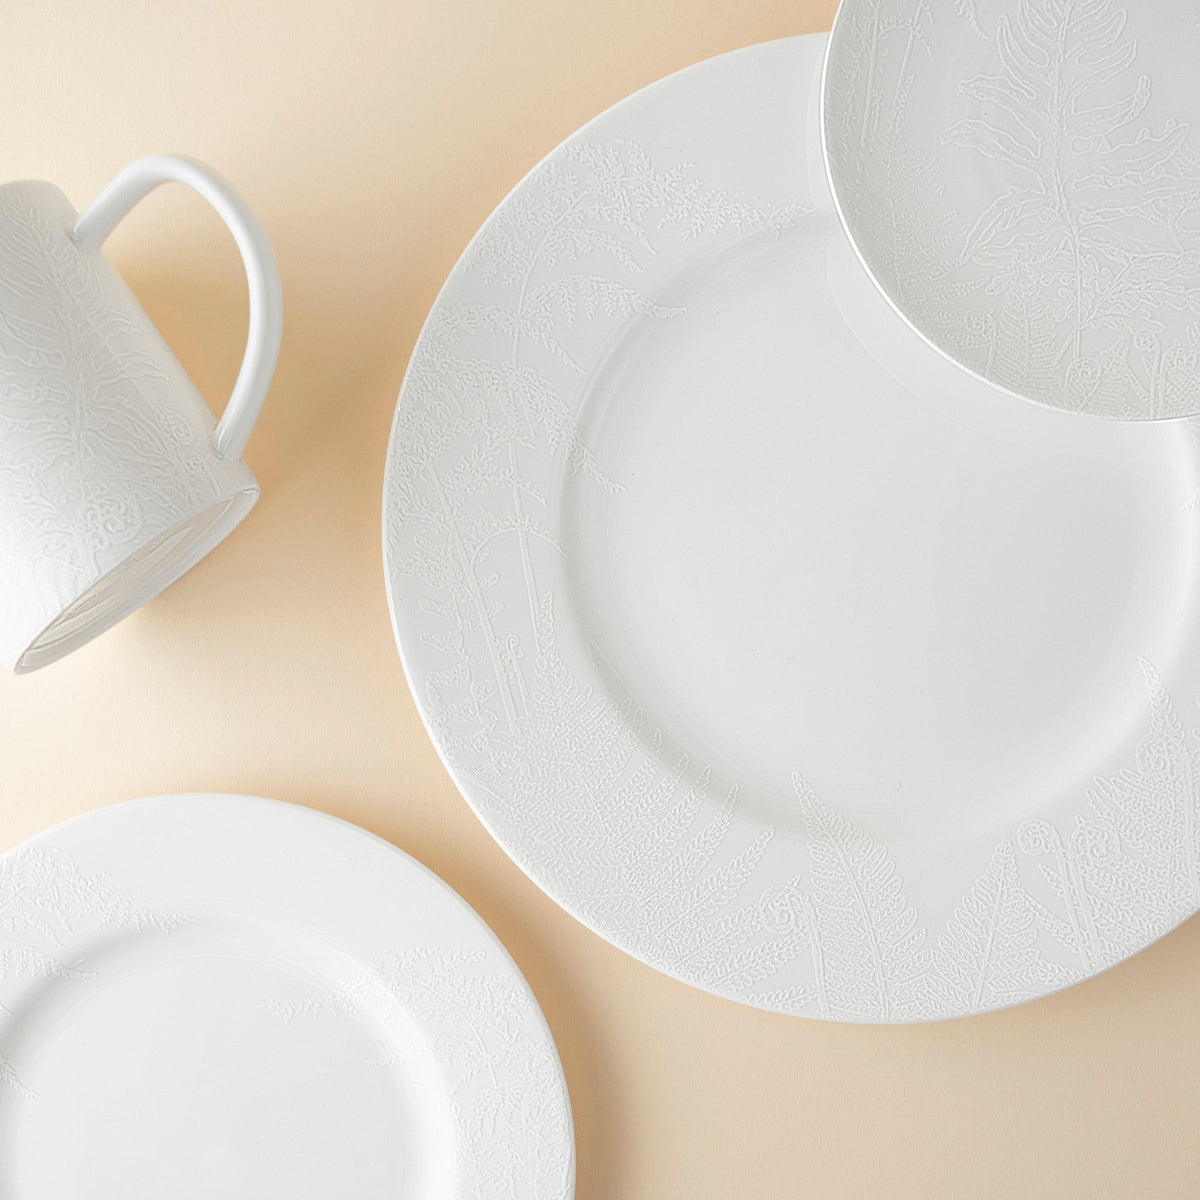 Three **Spring Small Plates by Caskata Artisanal Home** and a white mug with delicate embossed fern patterns are arranged on a light beige background, showcasing the elegance of botanical imagery in our Spring collection.